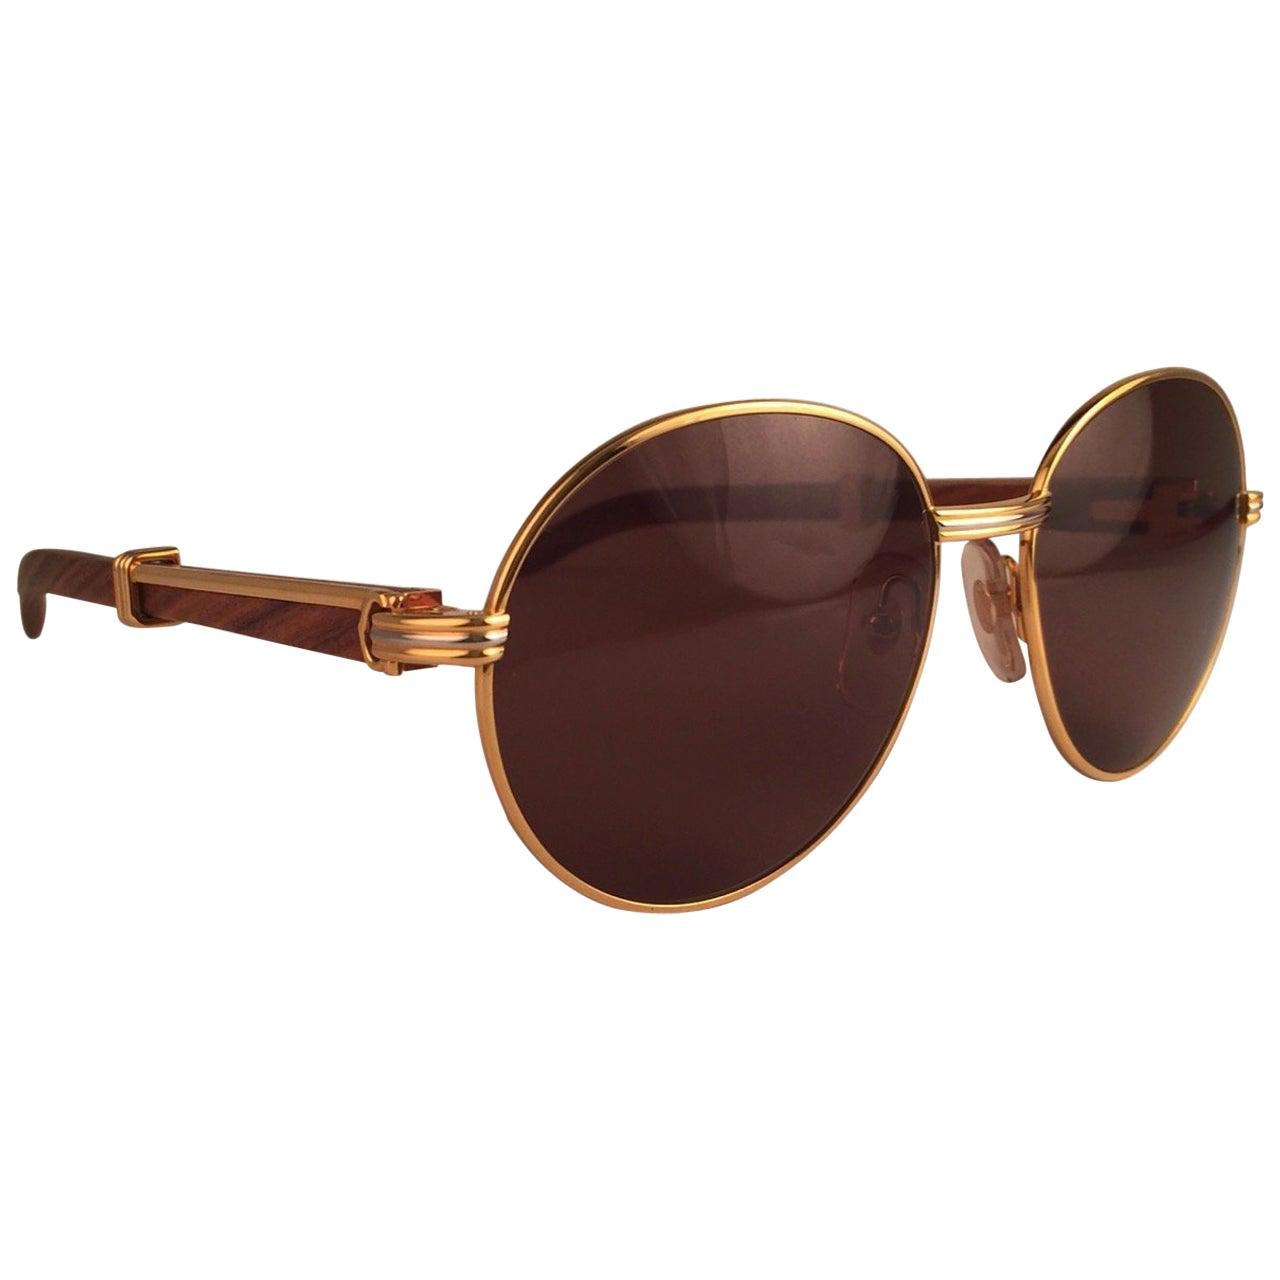 New original 1990 Cartier Bagatelle Wood Sunglasses from the coveted Precious Wood series with wood temples and honey brown (uv protection) lenses. 
The frame has the front and sides in yellow and white gold. All hallmarks. gold Cartier signs on the